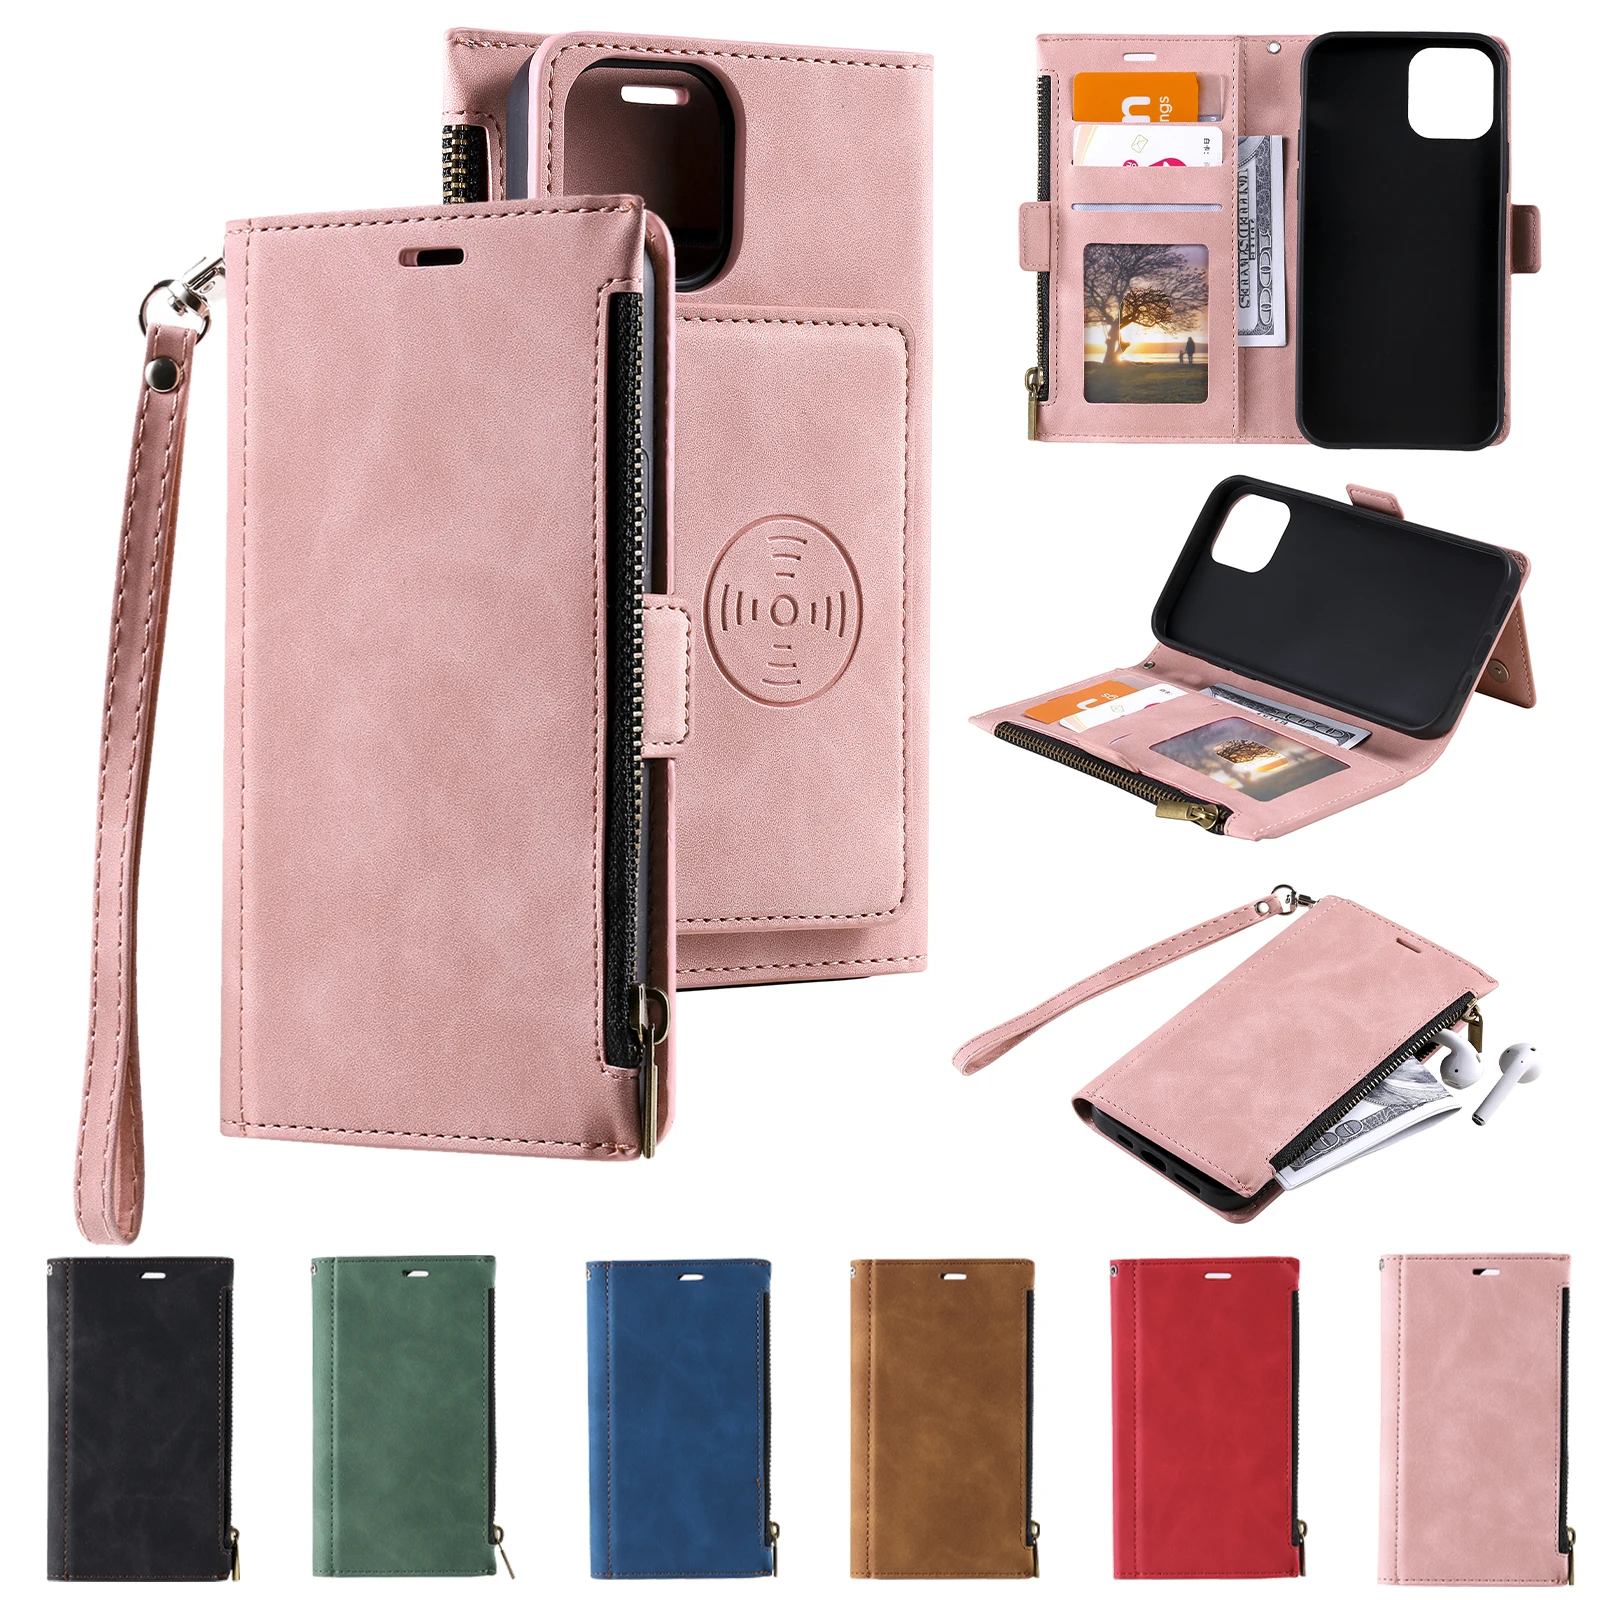 Leather Case For Samsung GalaxyNote 20 Ultra Wallet Bag Cover for Samsung S10 S20 Plus S21 Pro FE A82 A72 A52 A42 A32 A51 Cases